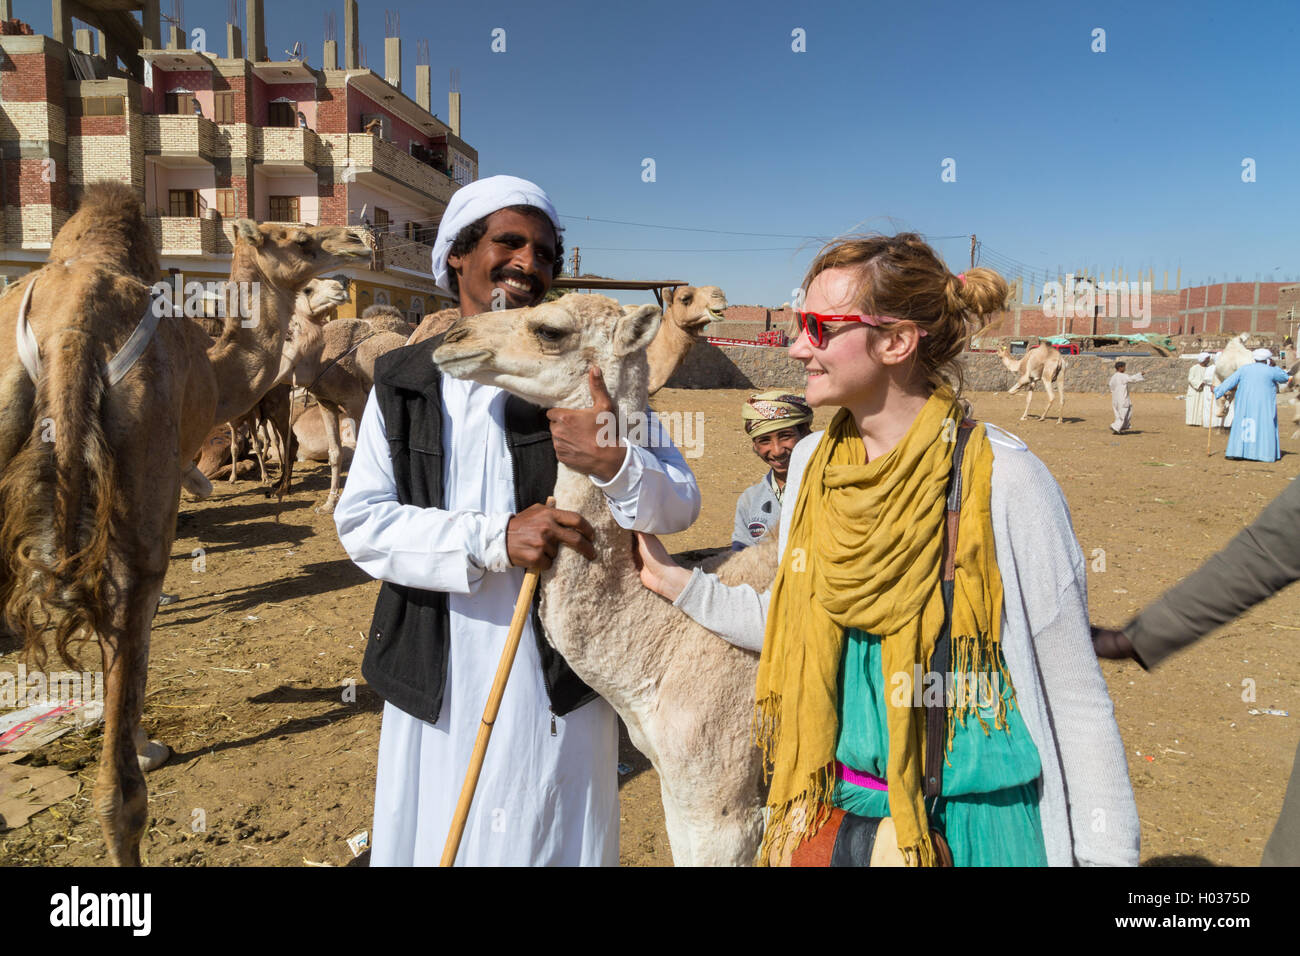 DARAW, EGYPT - FEBRUARY 6, 2016: Tourist and local camel salesmen at camel market. Stock Photo